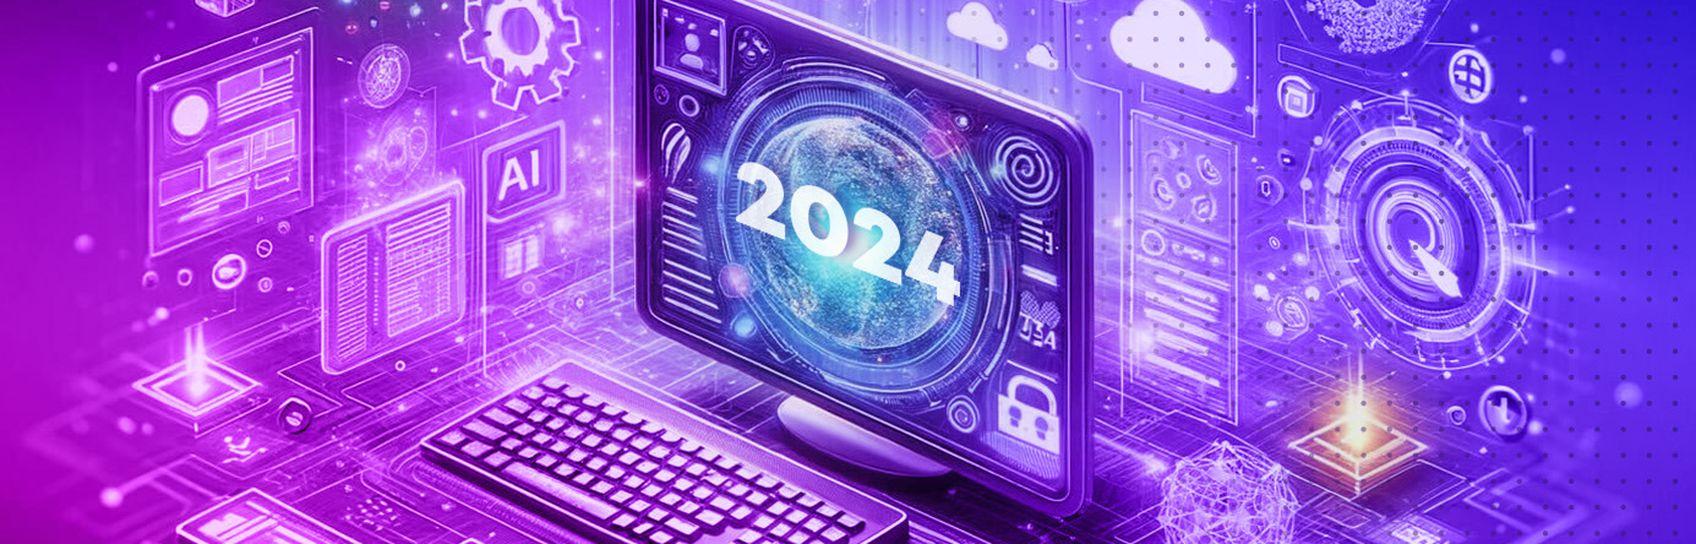 A computer with miscellaneous futuristic elements around in and 2024 on screen.